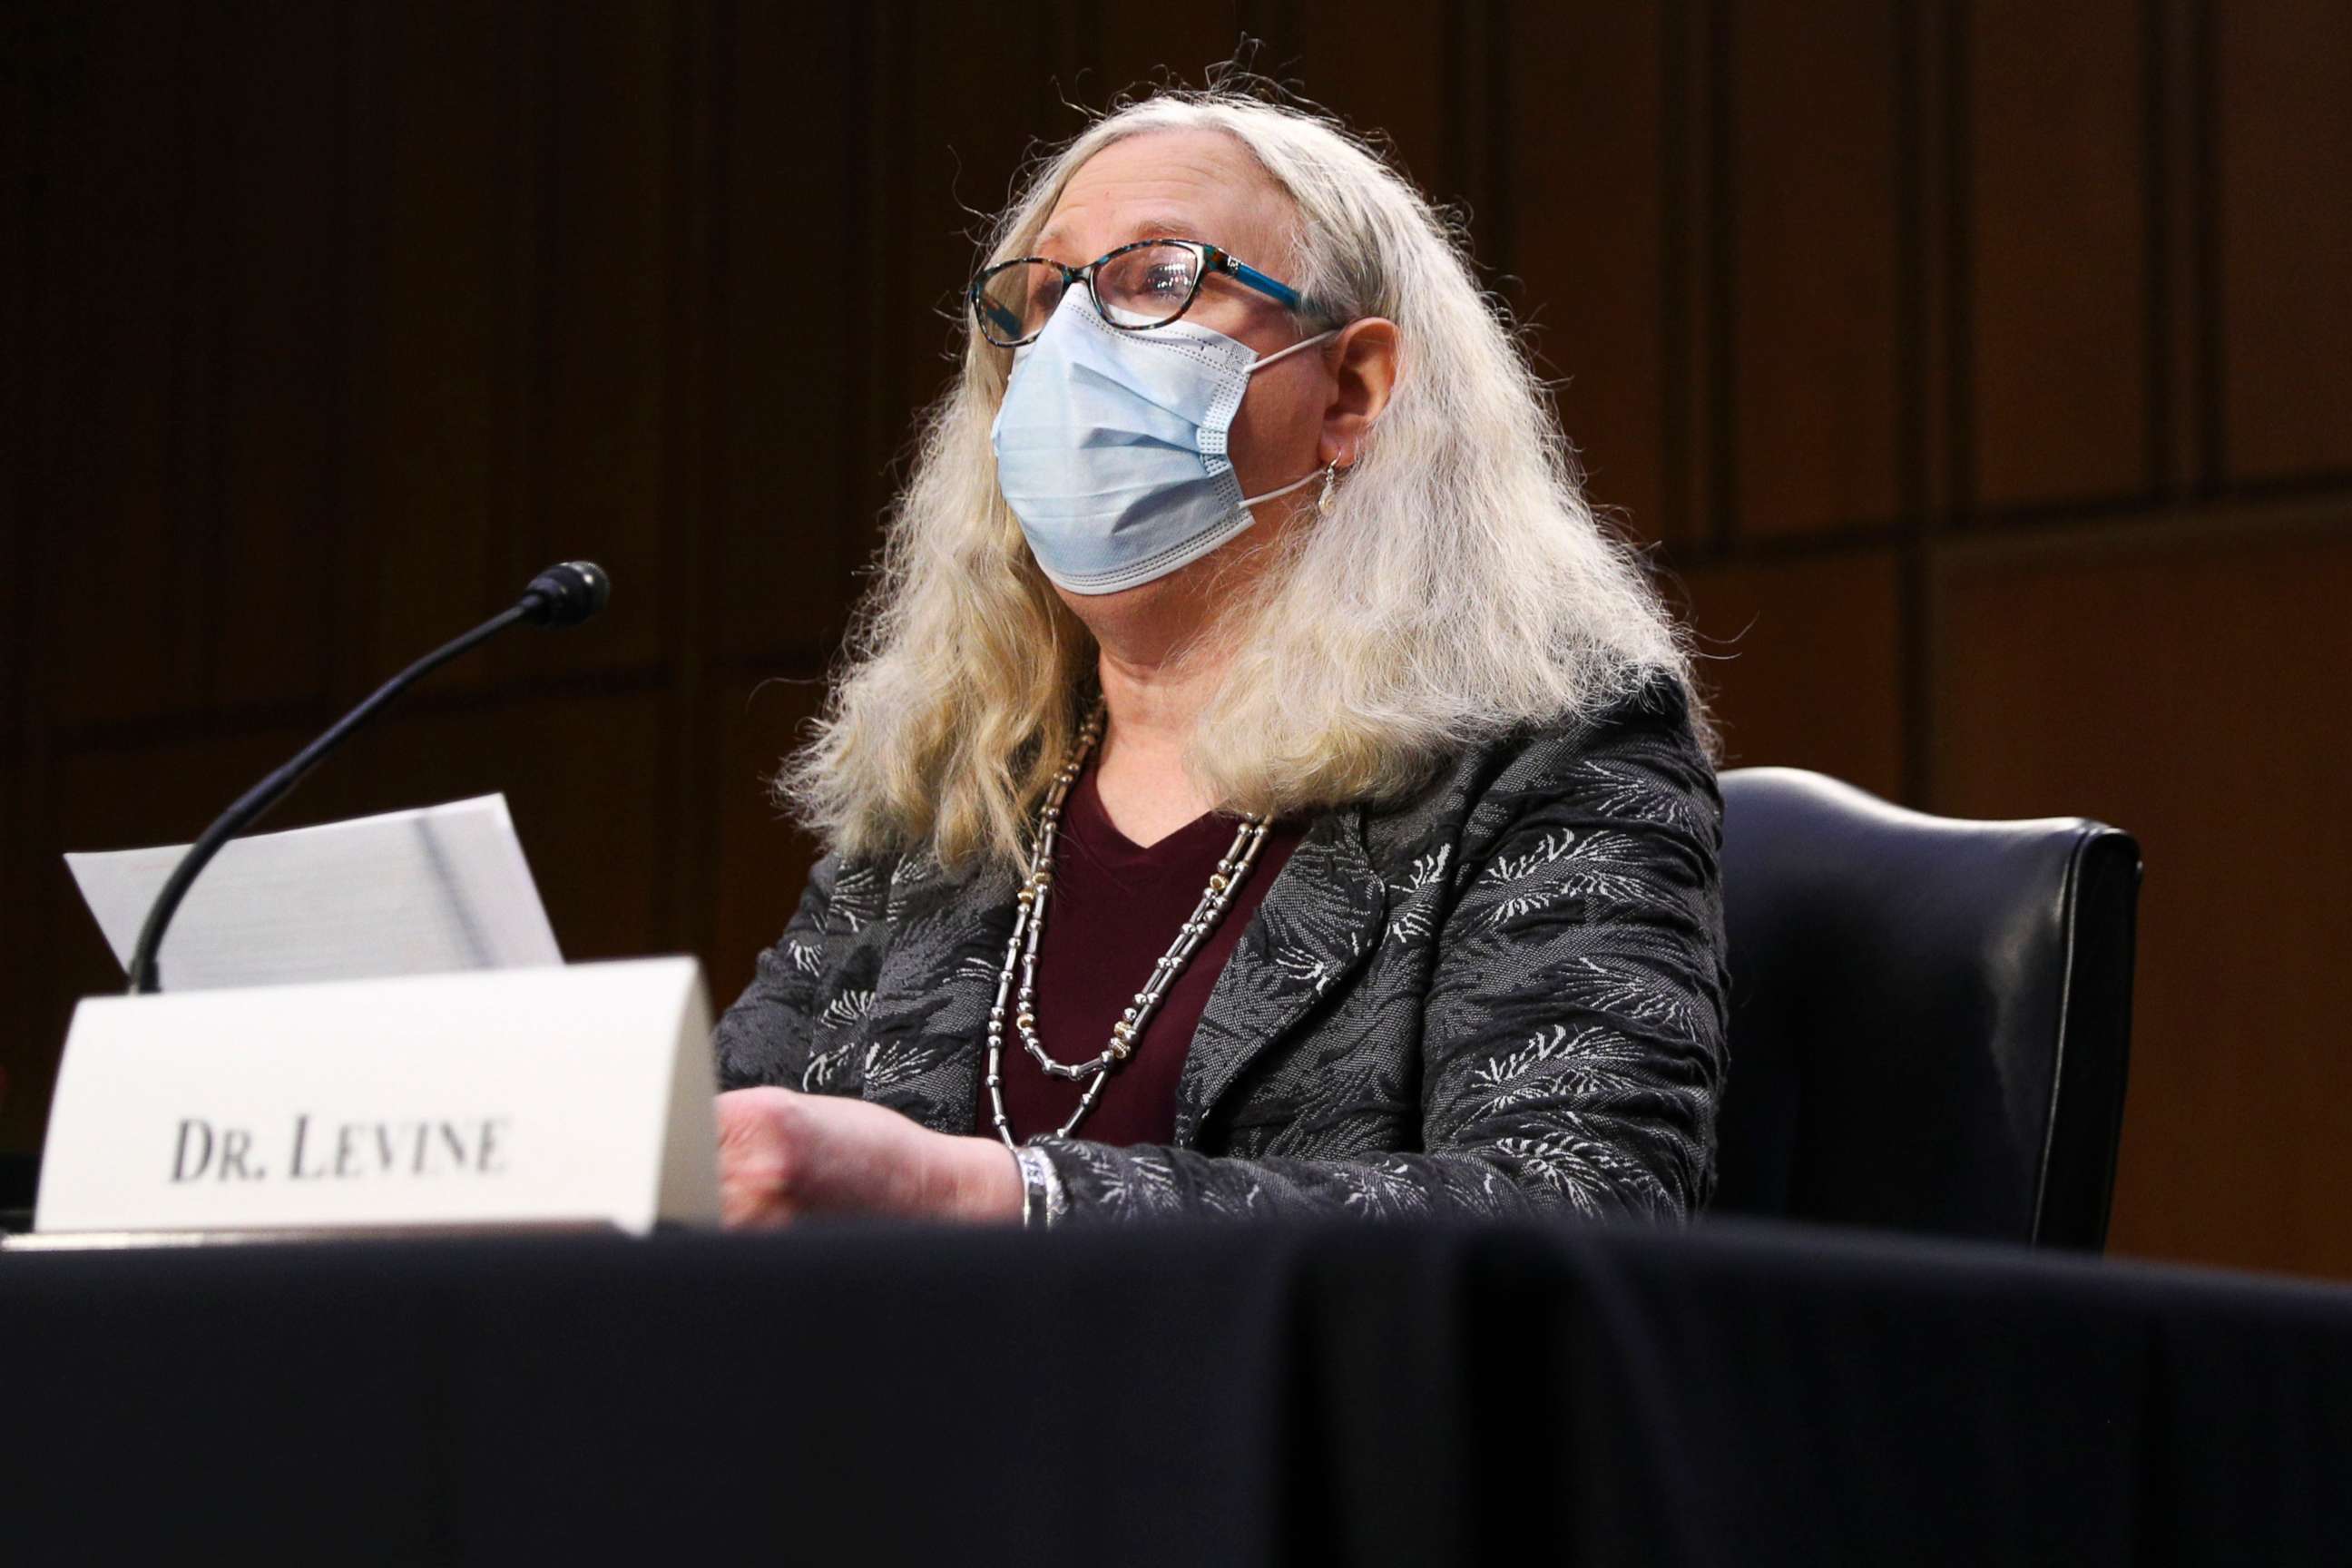 PHOTO: Rachel Levine, nominated to be an assistant secretary at the Department of Health and Human Services, testifies before the Senate Health, Education, Labor, and Pensions committee on Capitol Hill in Washington, D.C., on Feb. 25, 2021.